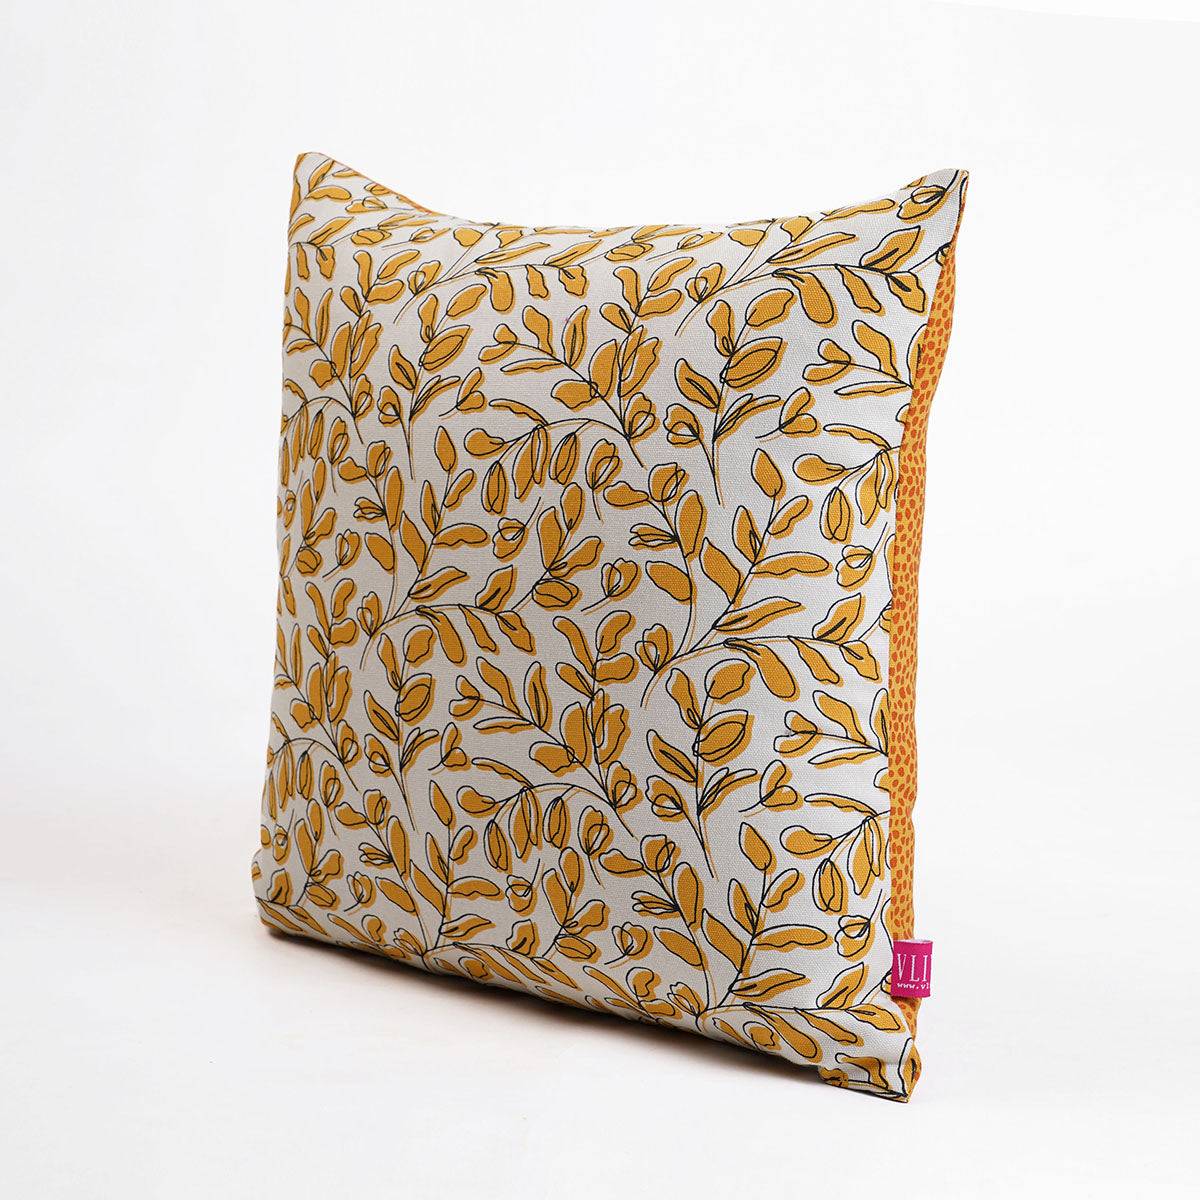 MODERN RETRO - Mustard Yellow reversible cotton throw pillow cover, leaf print, sizes available